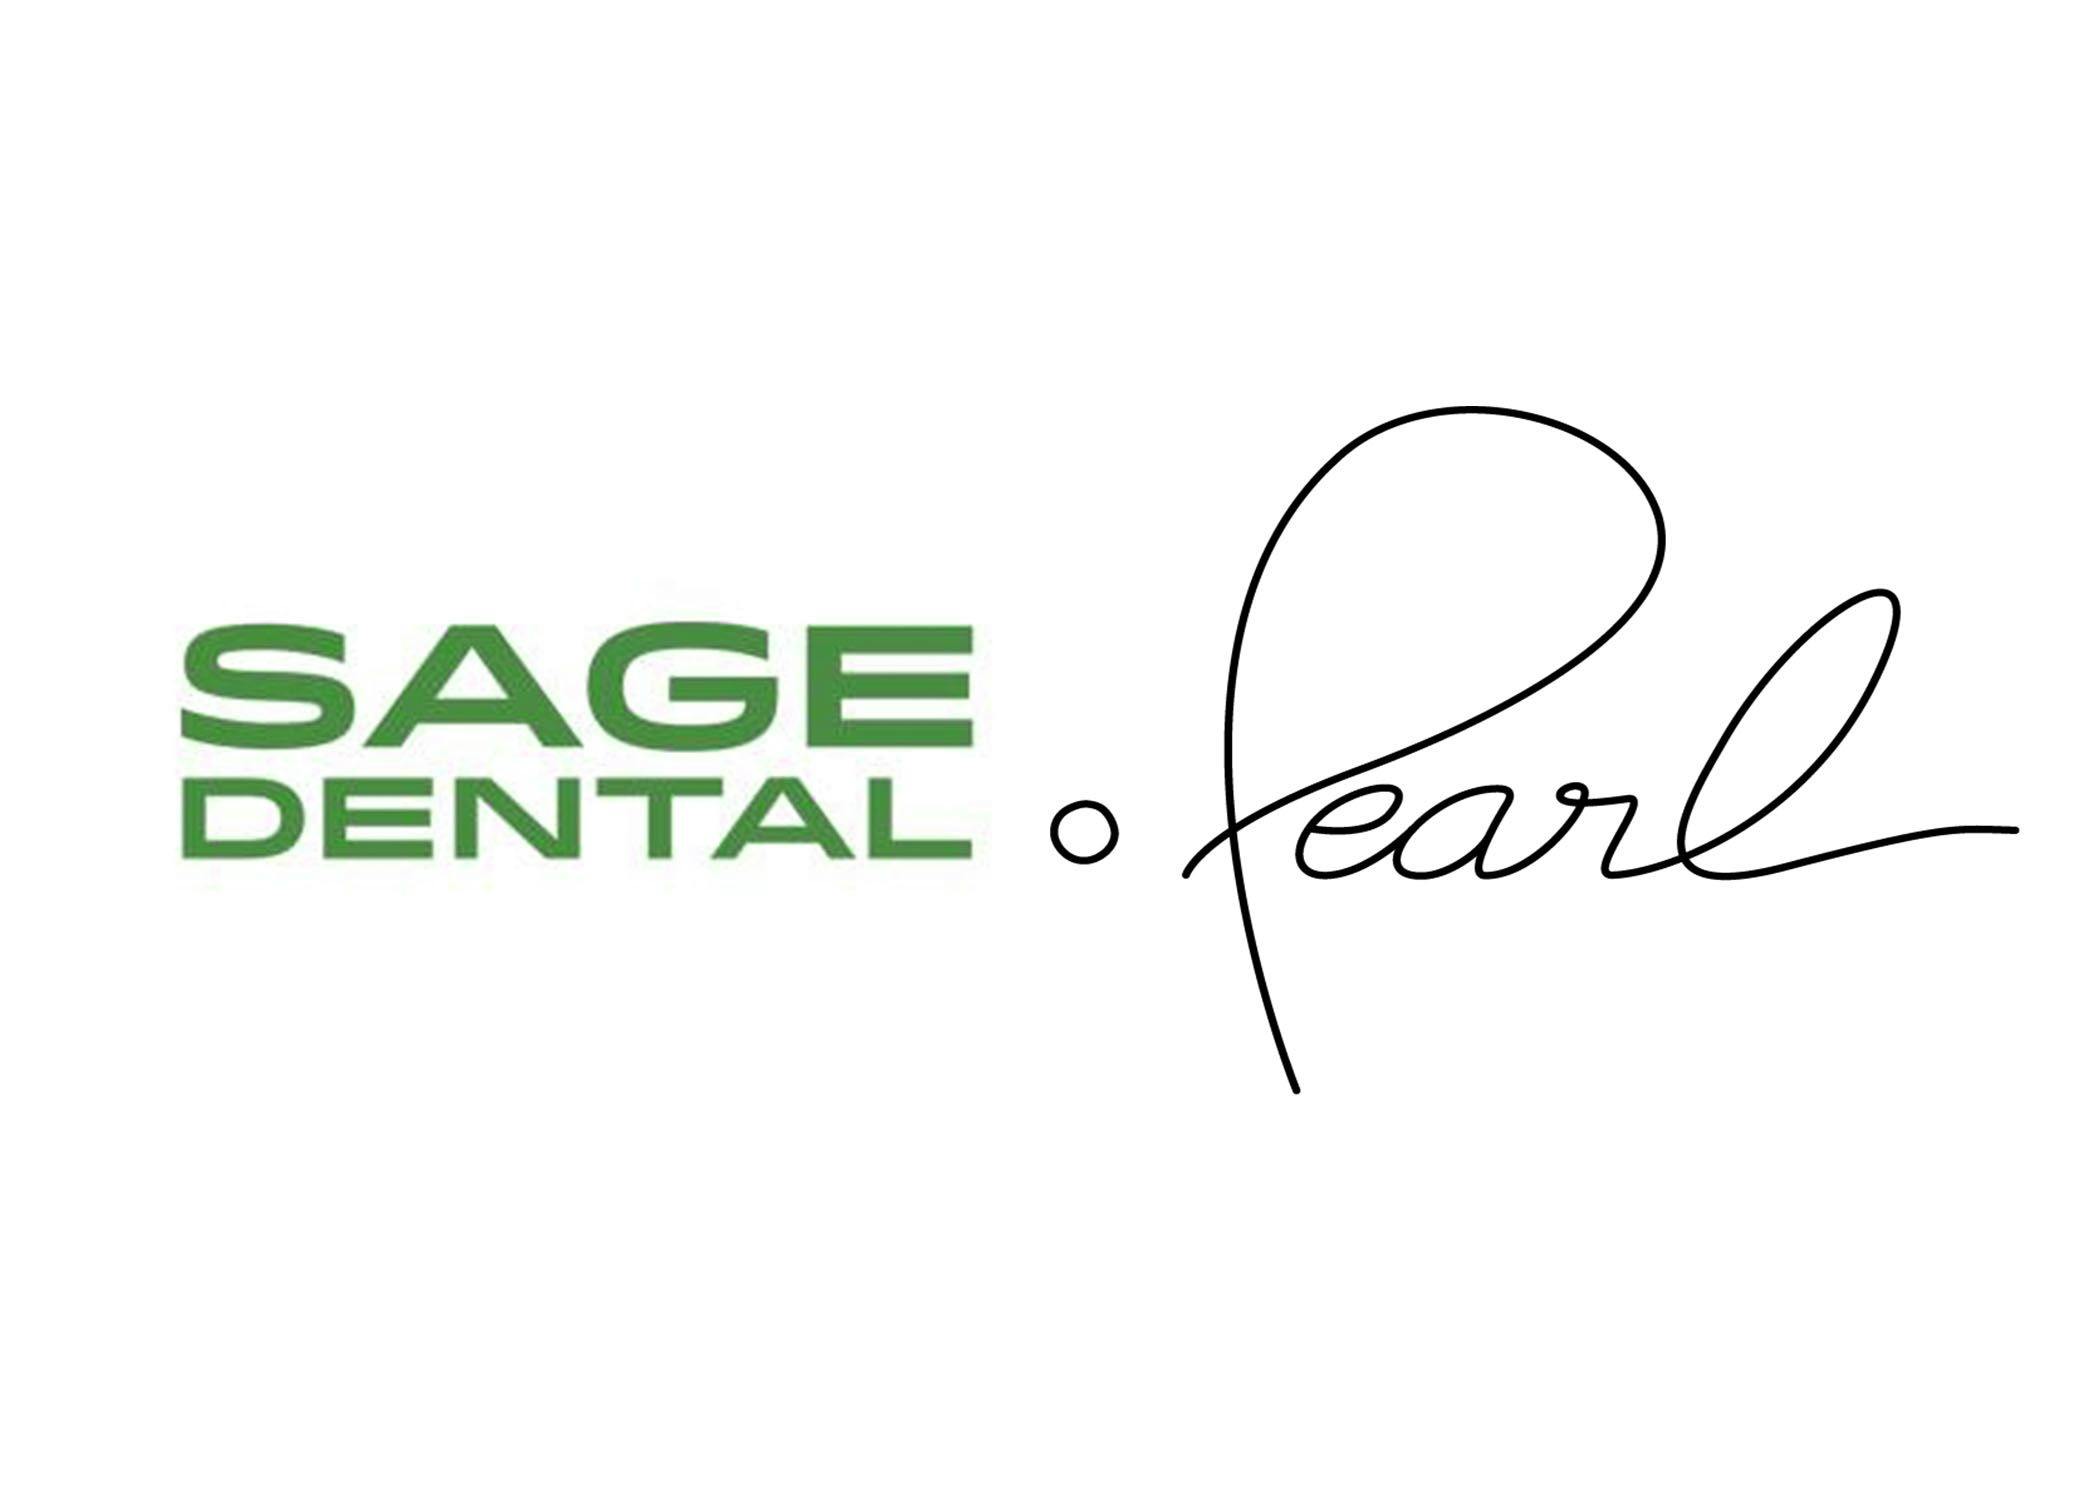 Sage Dental Partners with Pearl to Offer AI Clinical Care to Patients